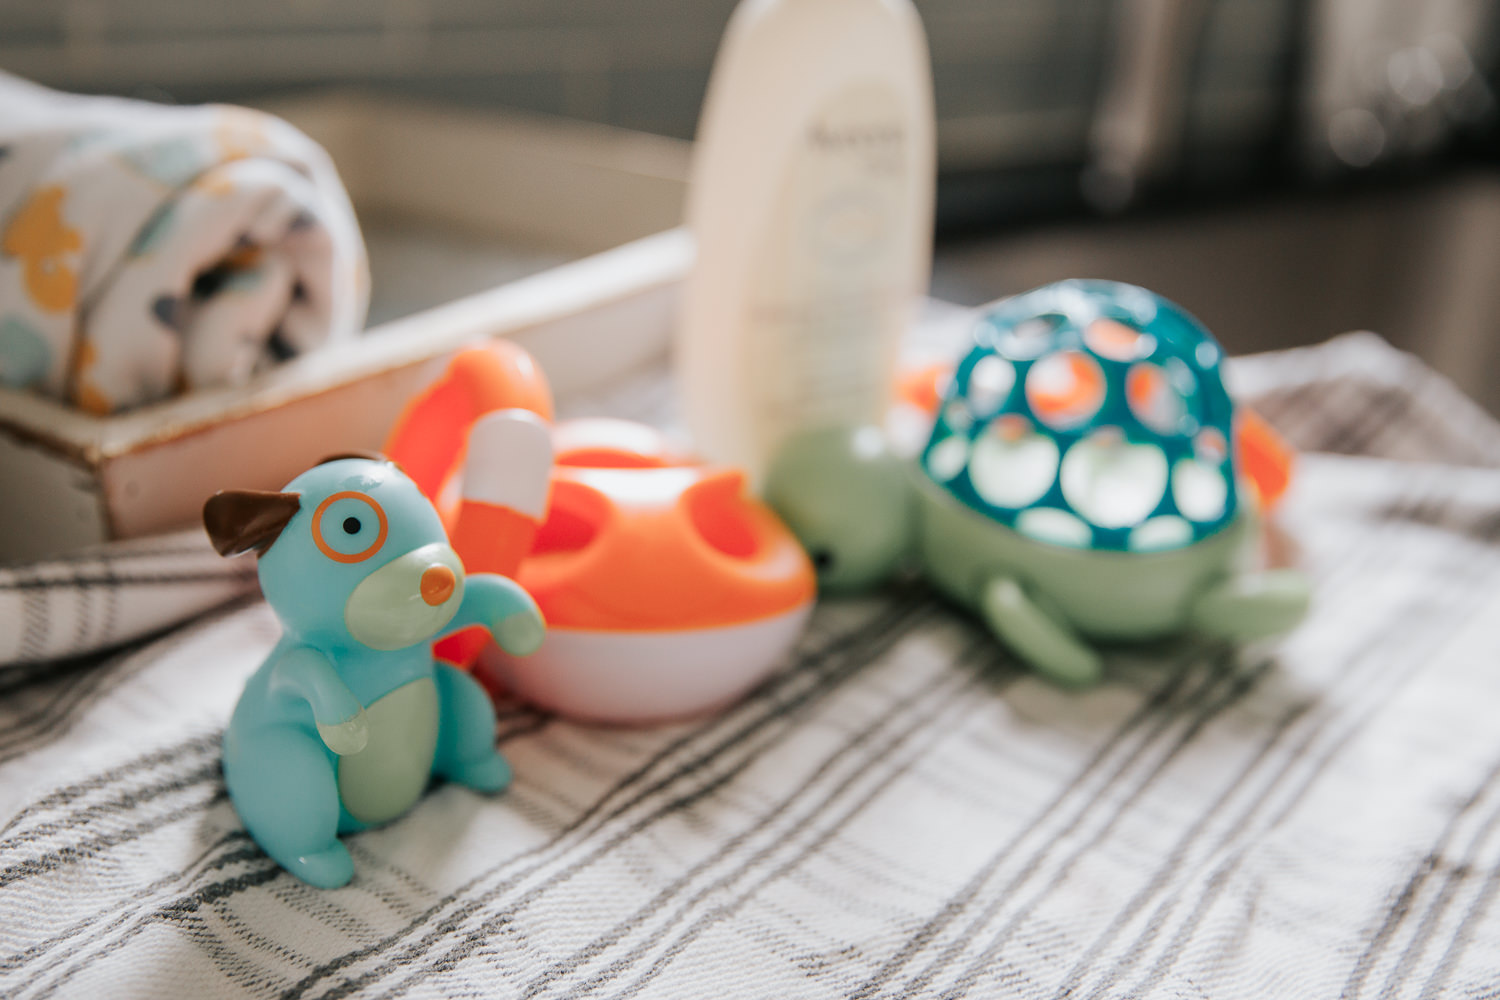 rubber bath toys sitting on towel on kitchen counter - GTA In-Home Photography